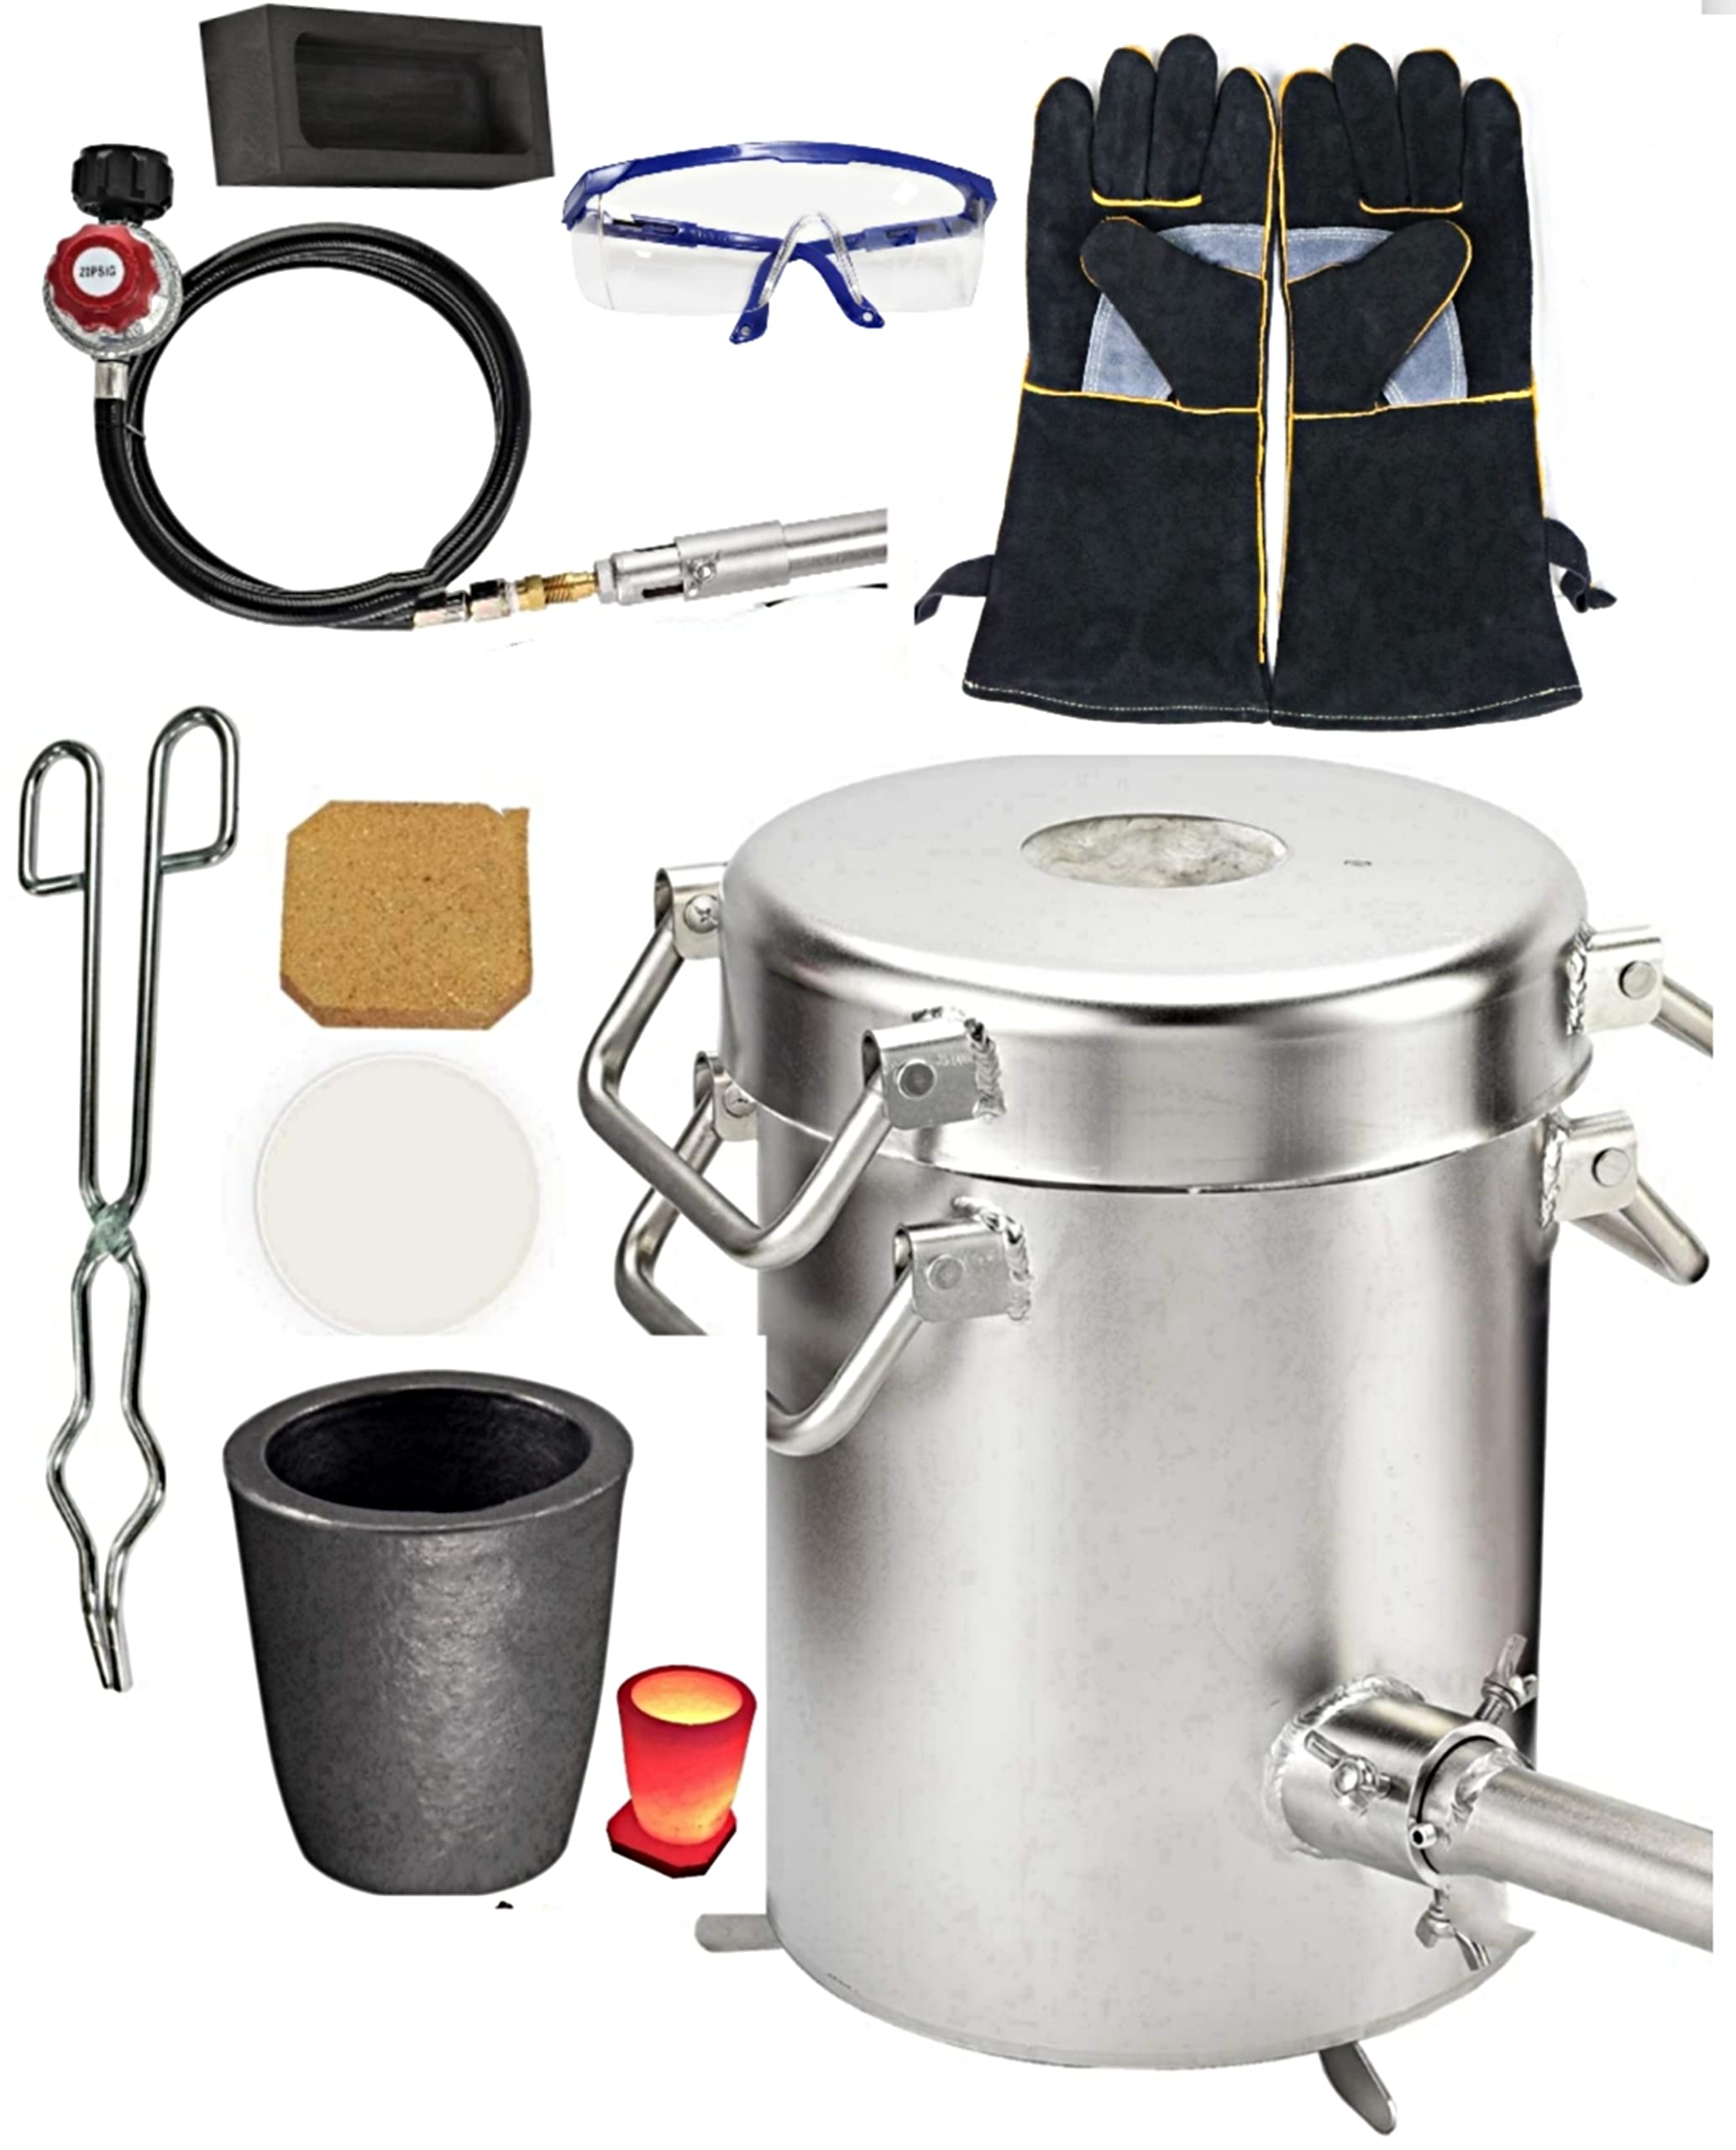 0-28lbs/12.8KGS Gas/Propane Metal Melting Furnace Kit, UP to 1800°C/3872°F, Crucible, Gloves, Goggles, Tong, Klin, Smelt Gold, Silver, Alu, Copper,...